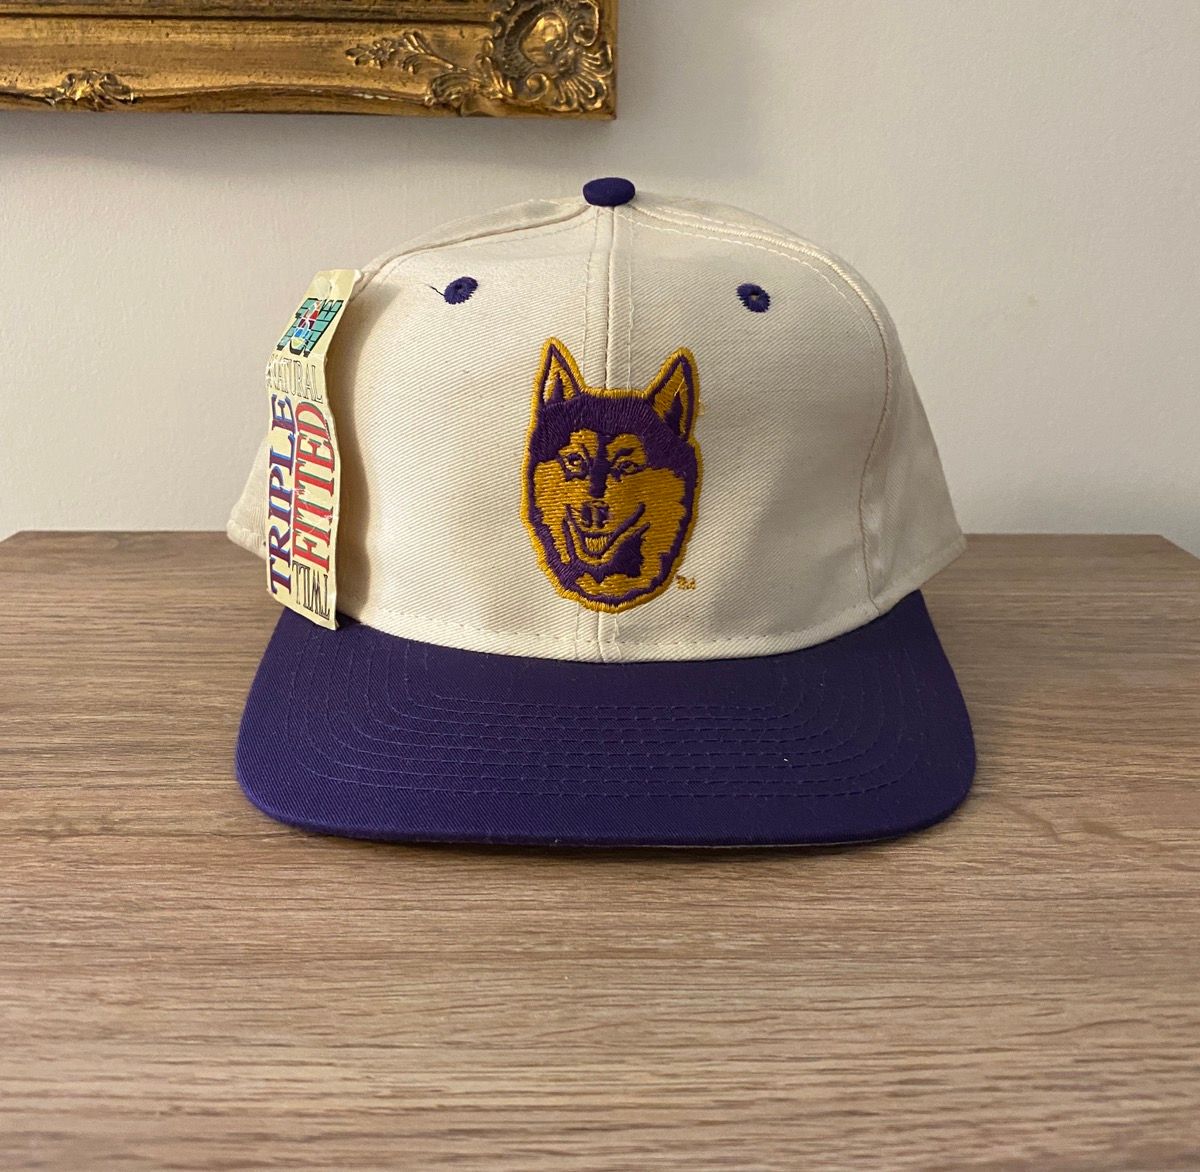 Pre-owned Collegiate X Ncaa Vintage Nwt 90's Washington Huskies Fitted Hat 7 1/8 Cap In White